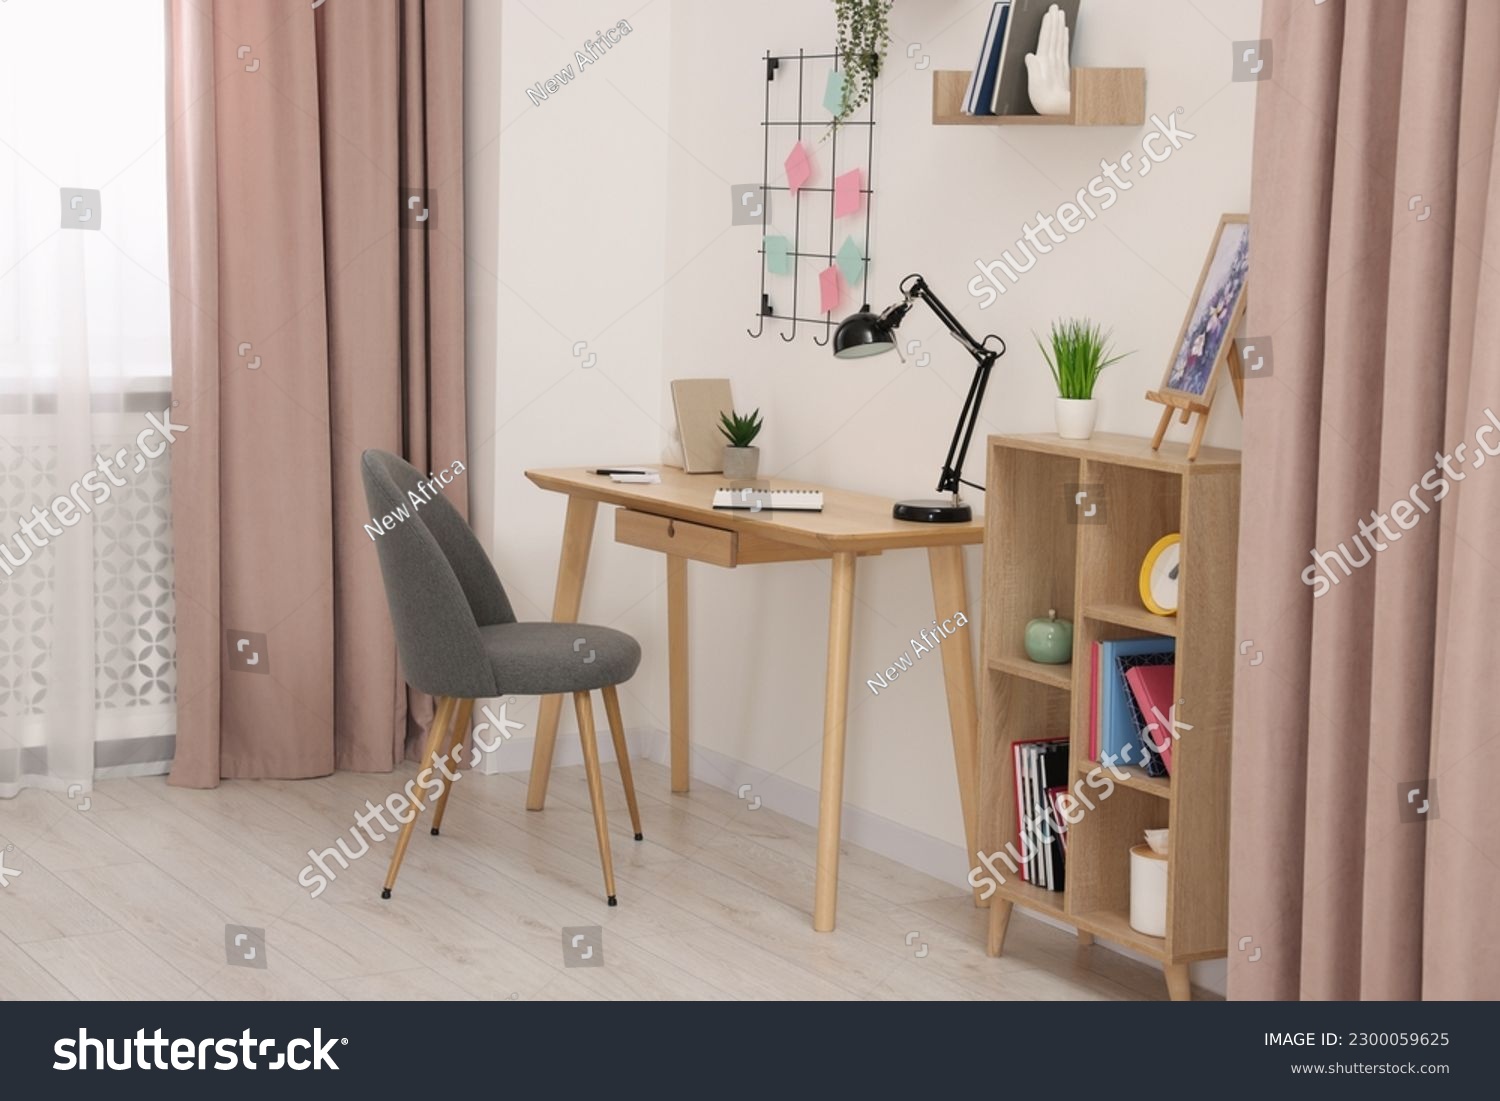 Stylish workplace with wooden desk, chair and lamp in room. Interior design #2300059625